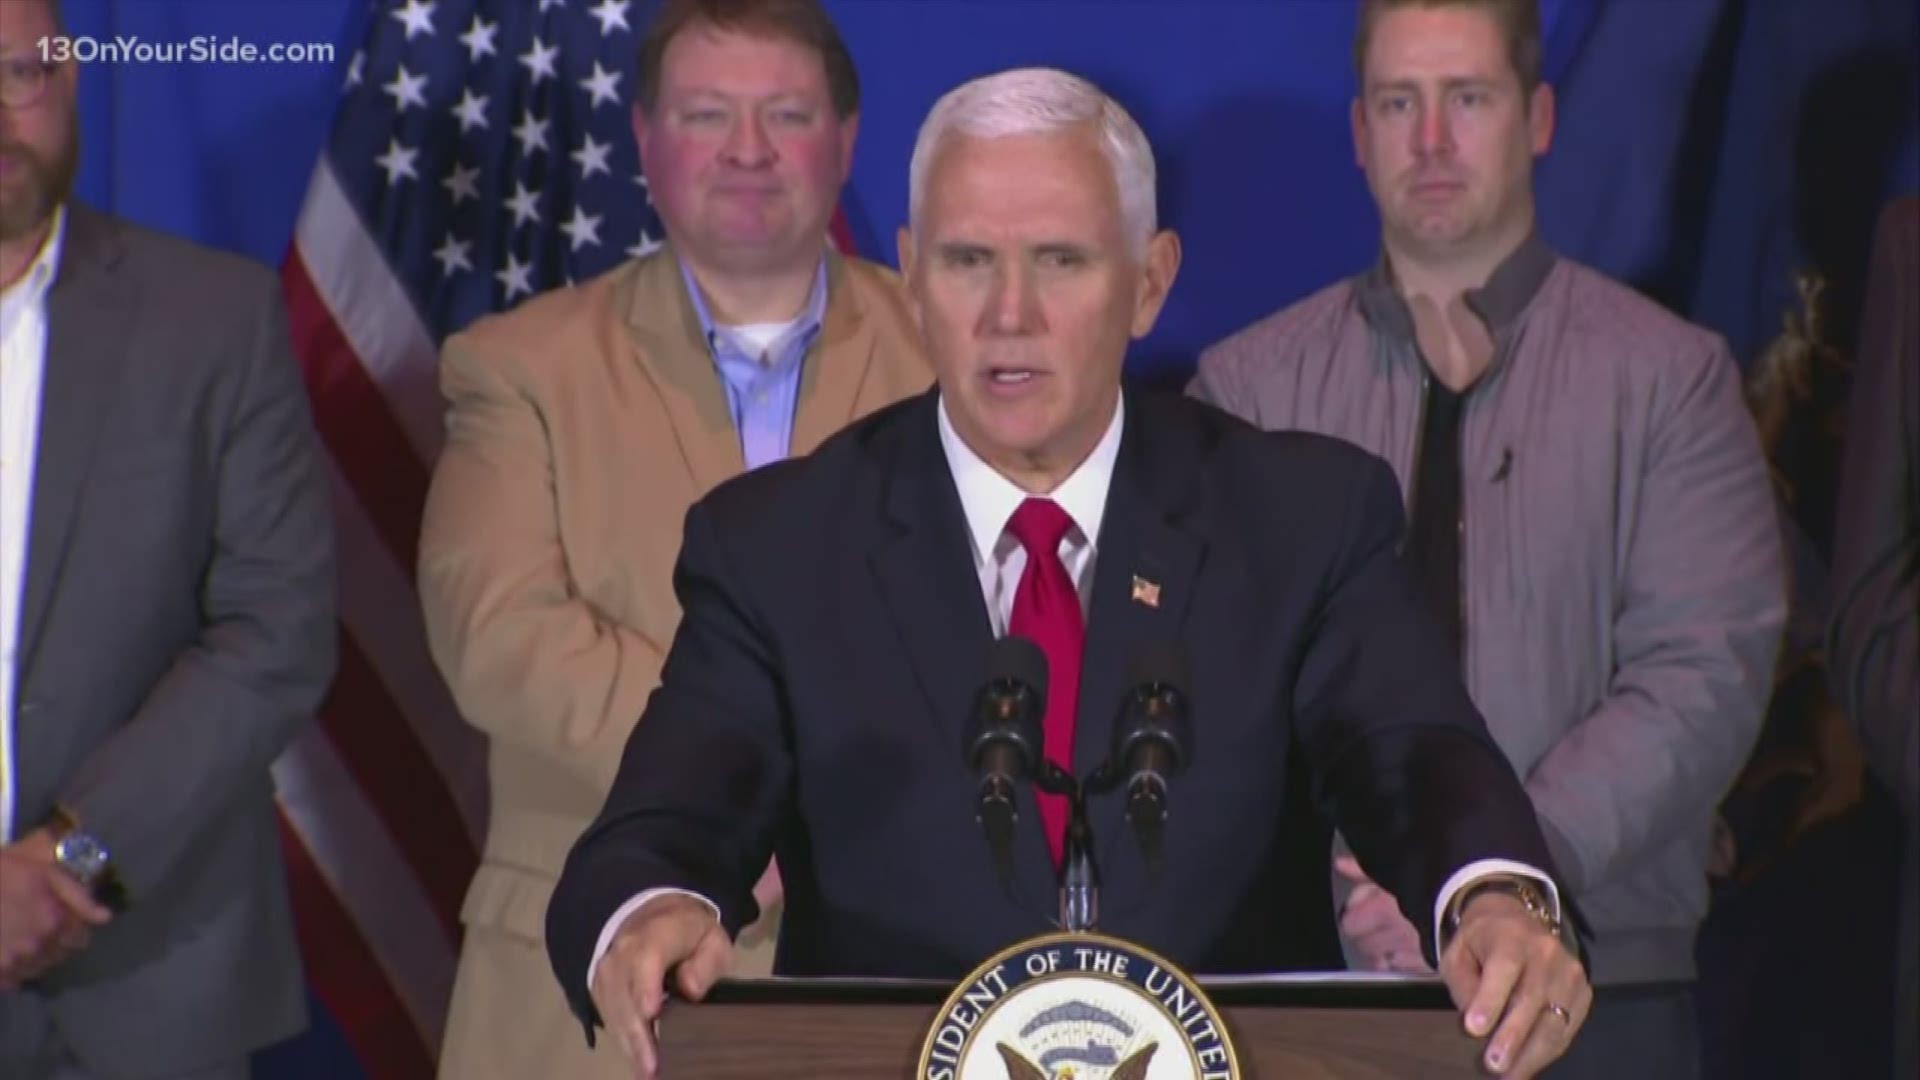 Pence made three stops Wednesday in West Michigan: Portage, Grand Rapids and Holland.